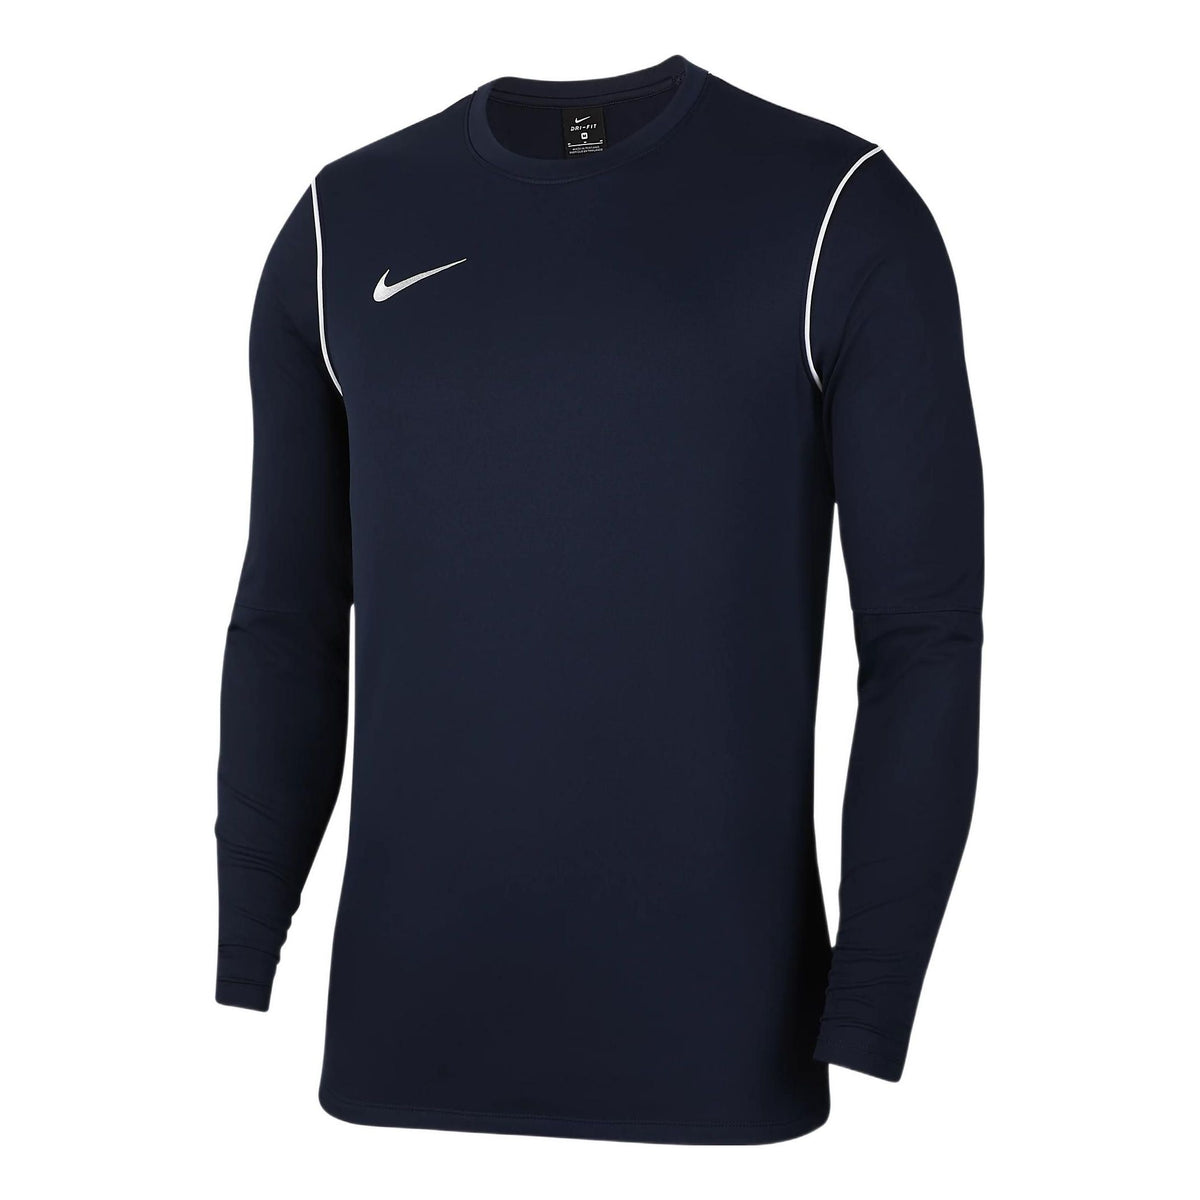 Men's Nike Logo Embroidered Round Neck Pullover Long Sleeves Navy Blue ...